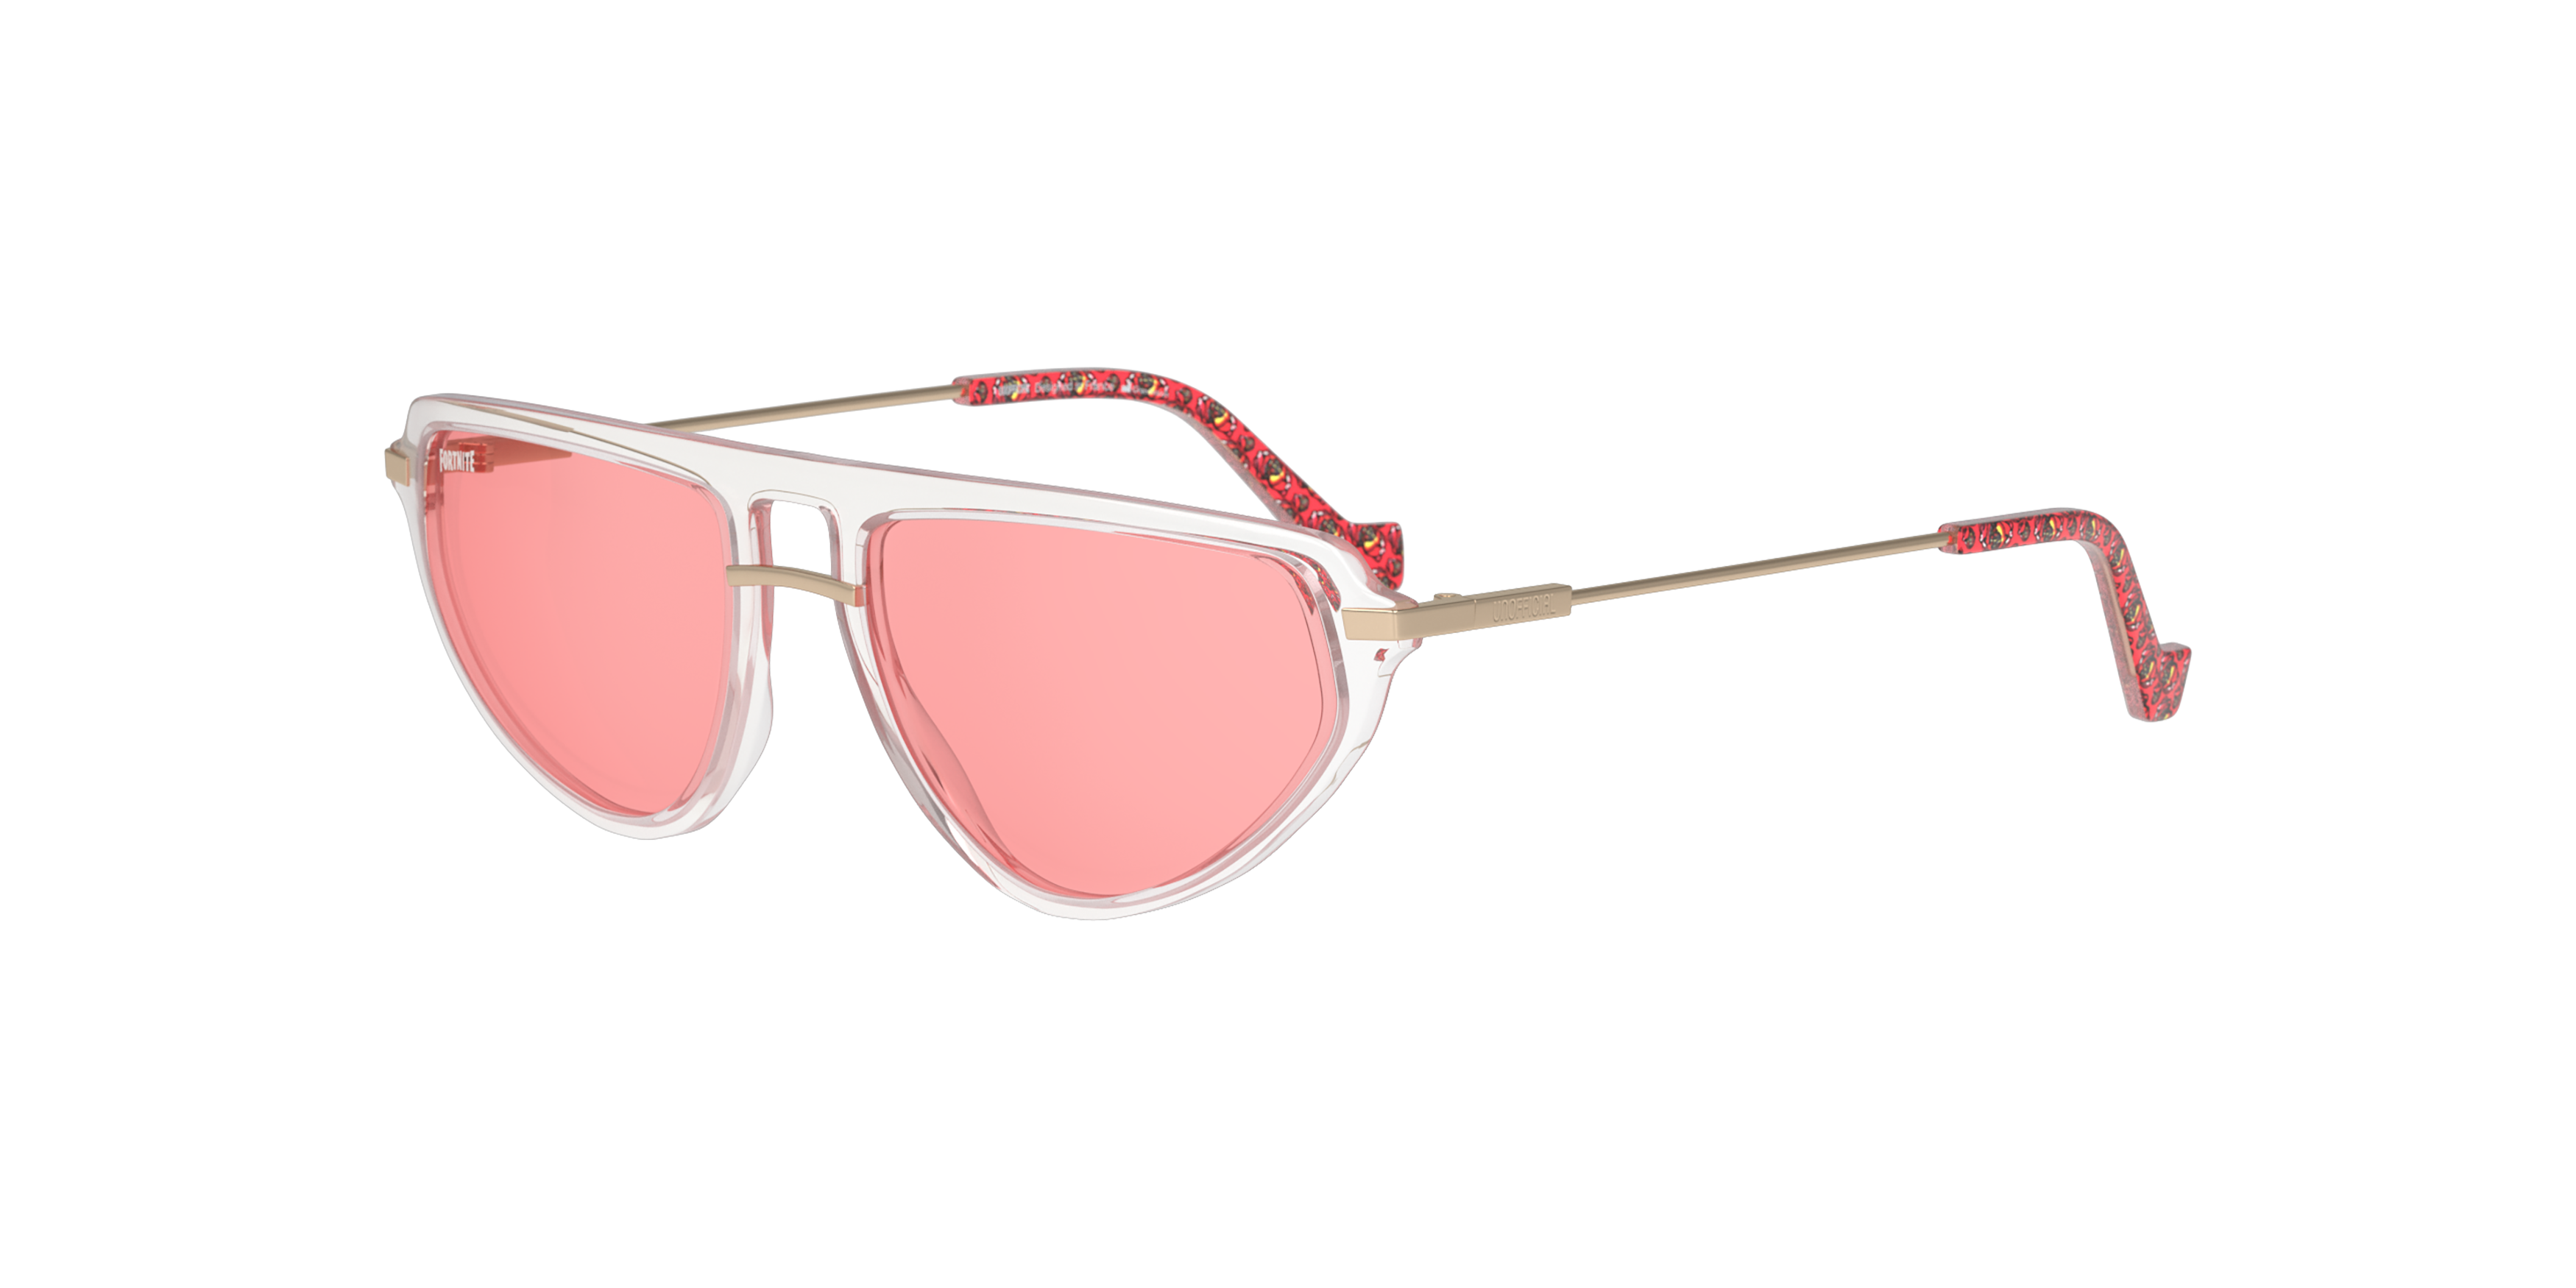 Angle_Left01 Fortnite with Unofficial UNSU0147 Sunglasses Pink / Transparent, Clear